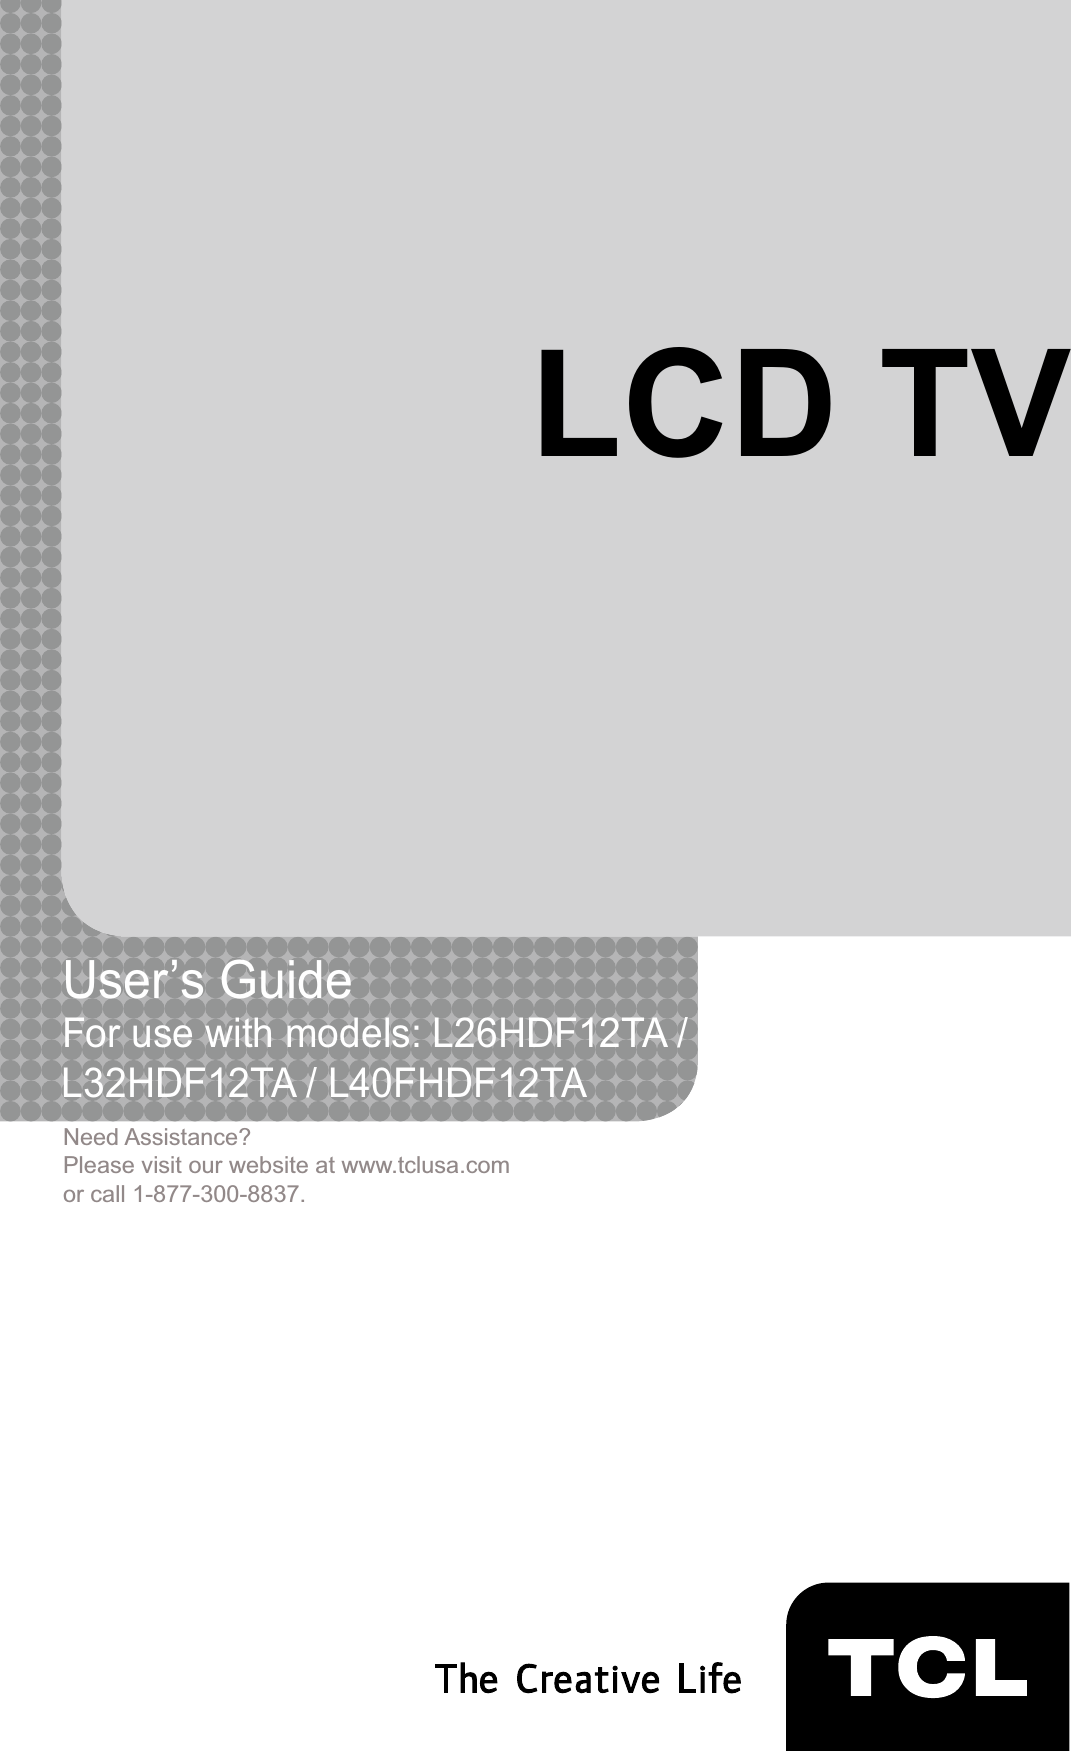 1LCD TVUser’s Guide For use with models: L26HDF12TA /L32HDF12TA / L40FHDF12TANeed Assistance?Please visit our website at www.tclusa.comor call 1-877-300-8837.